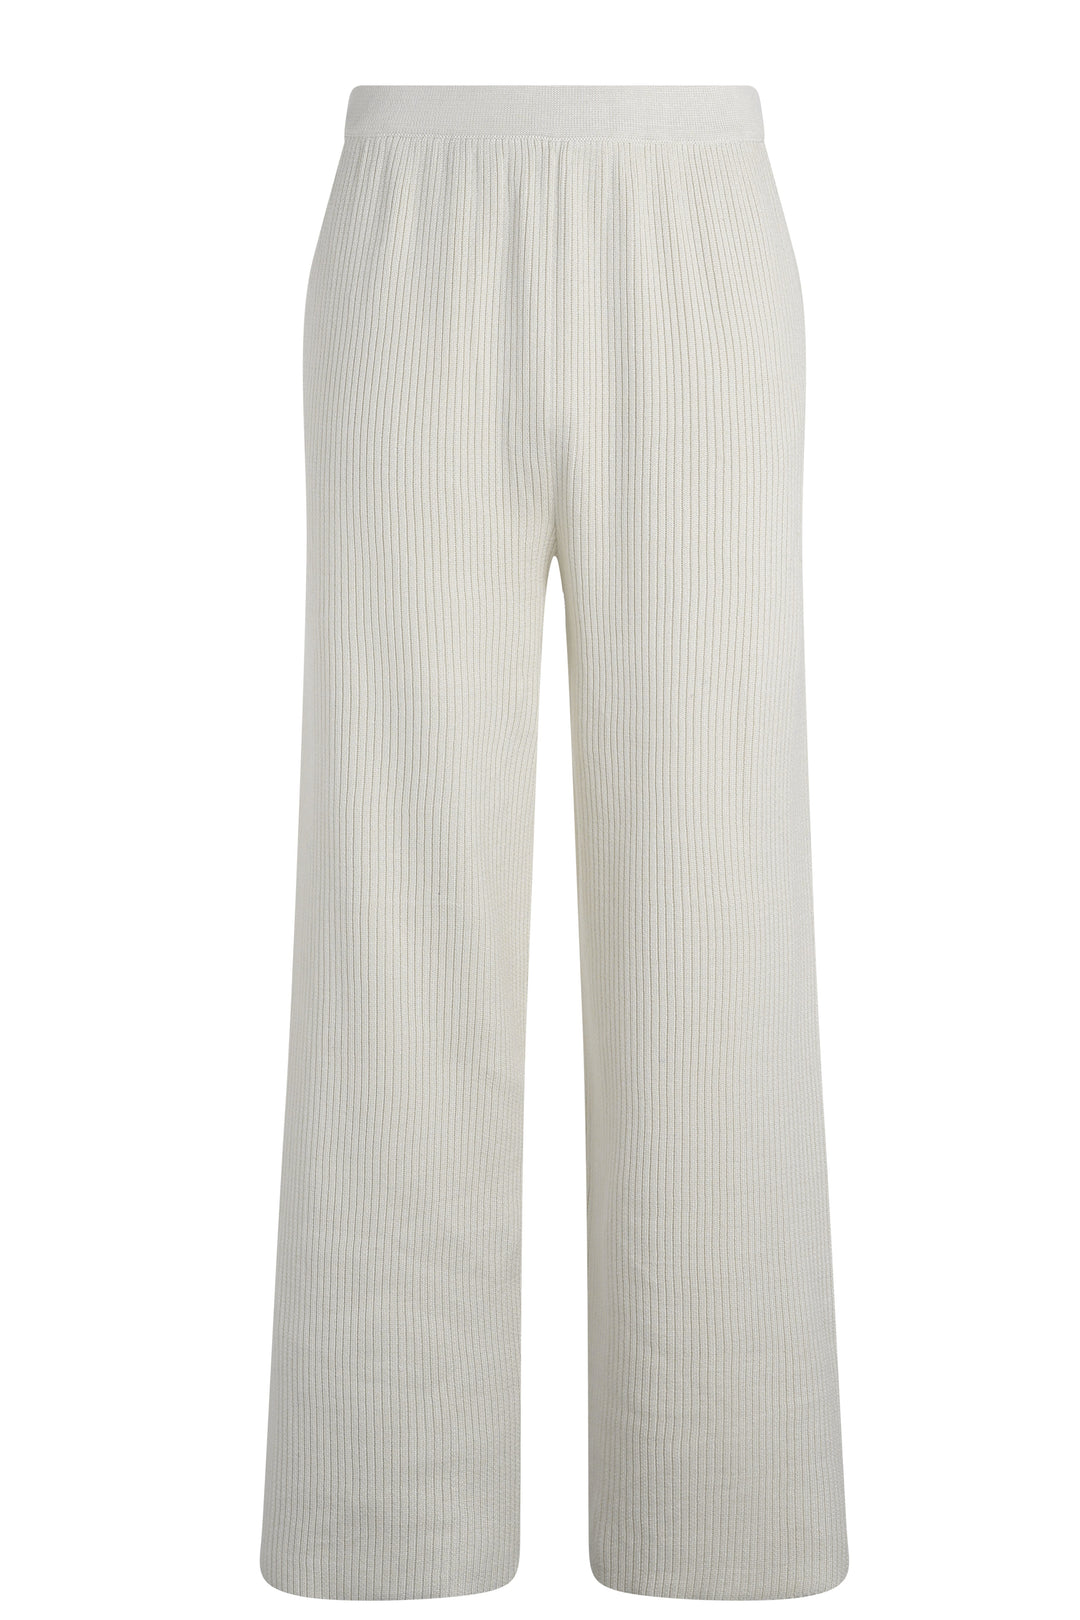 The Knitted Ribbed Pants - Oat Reuben Oliver